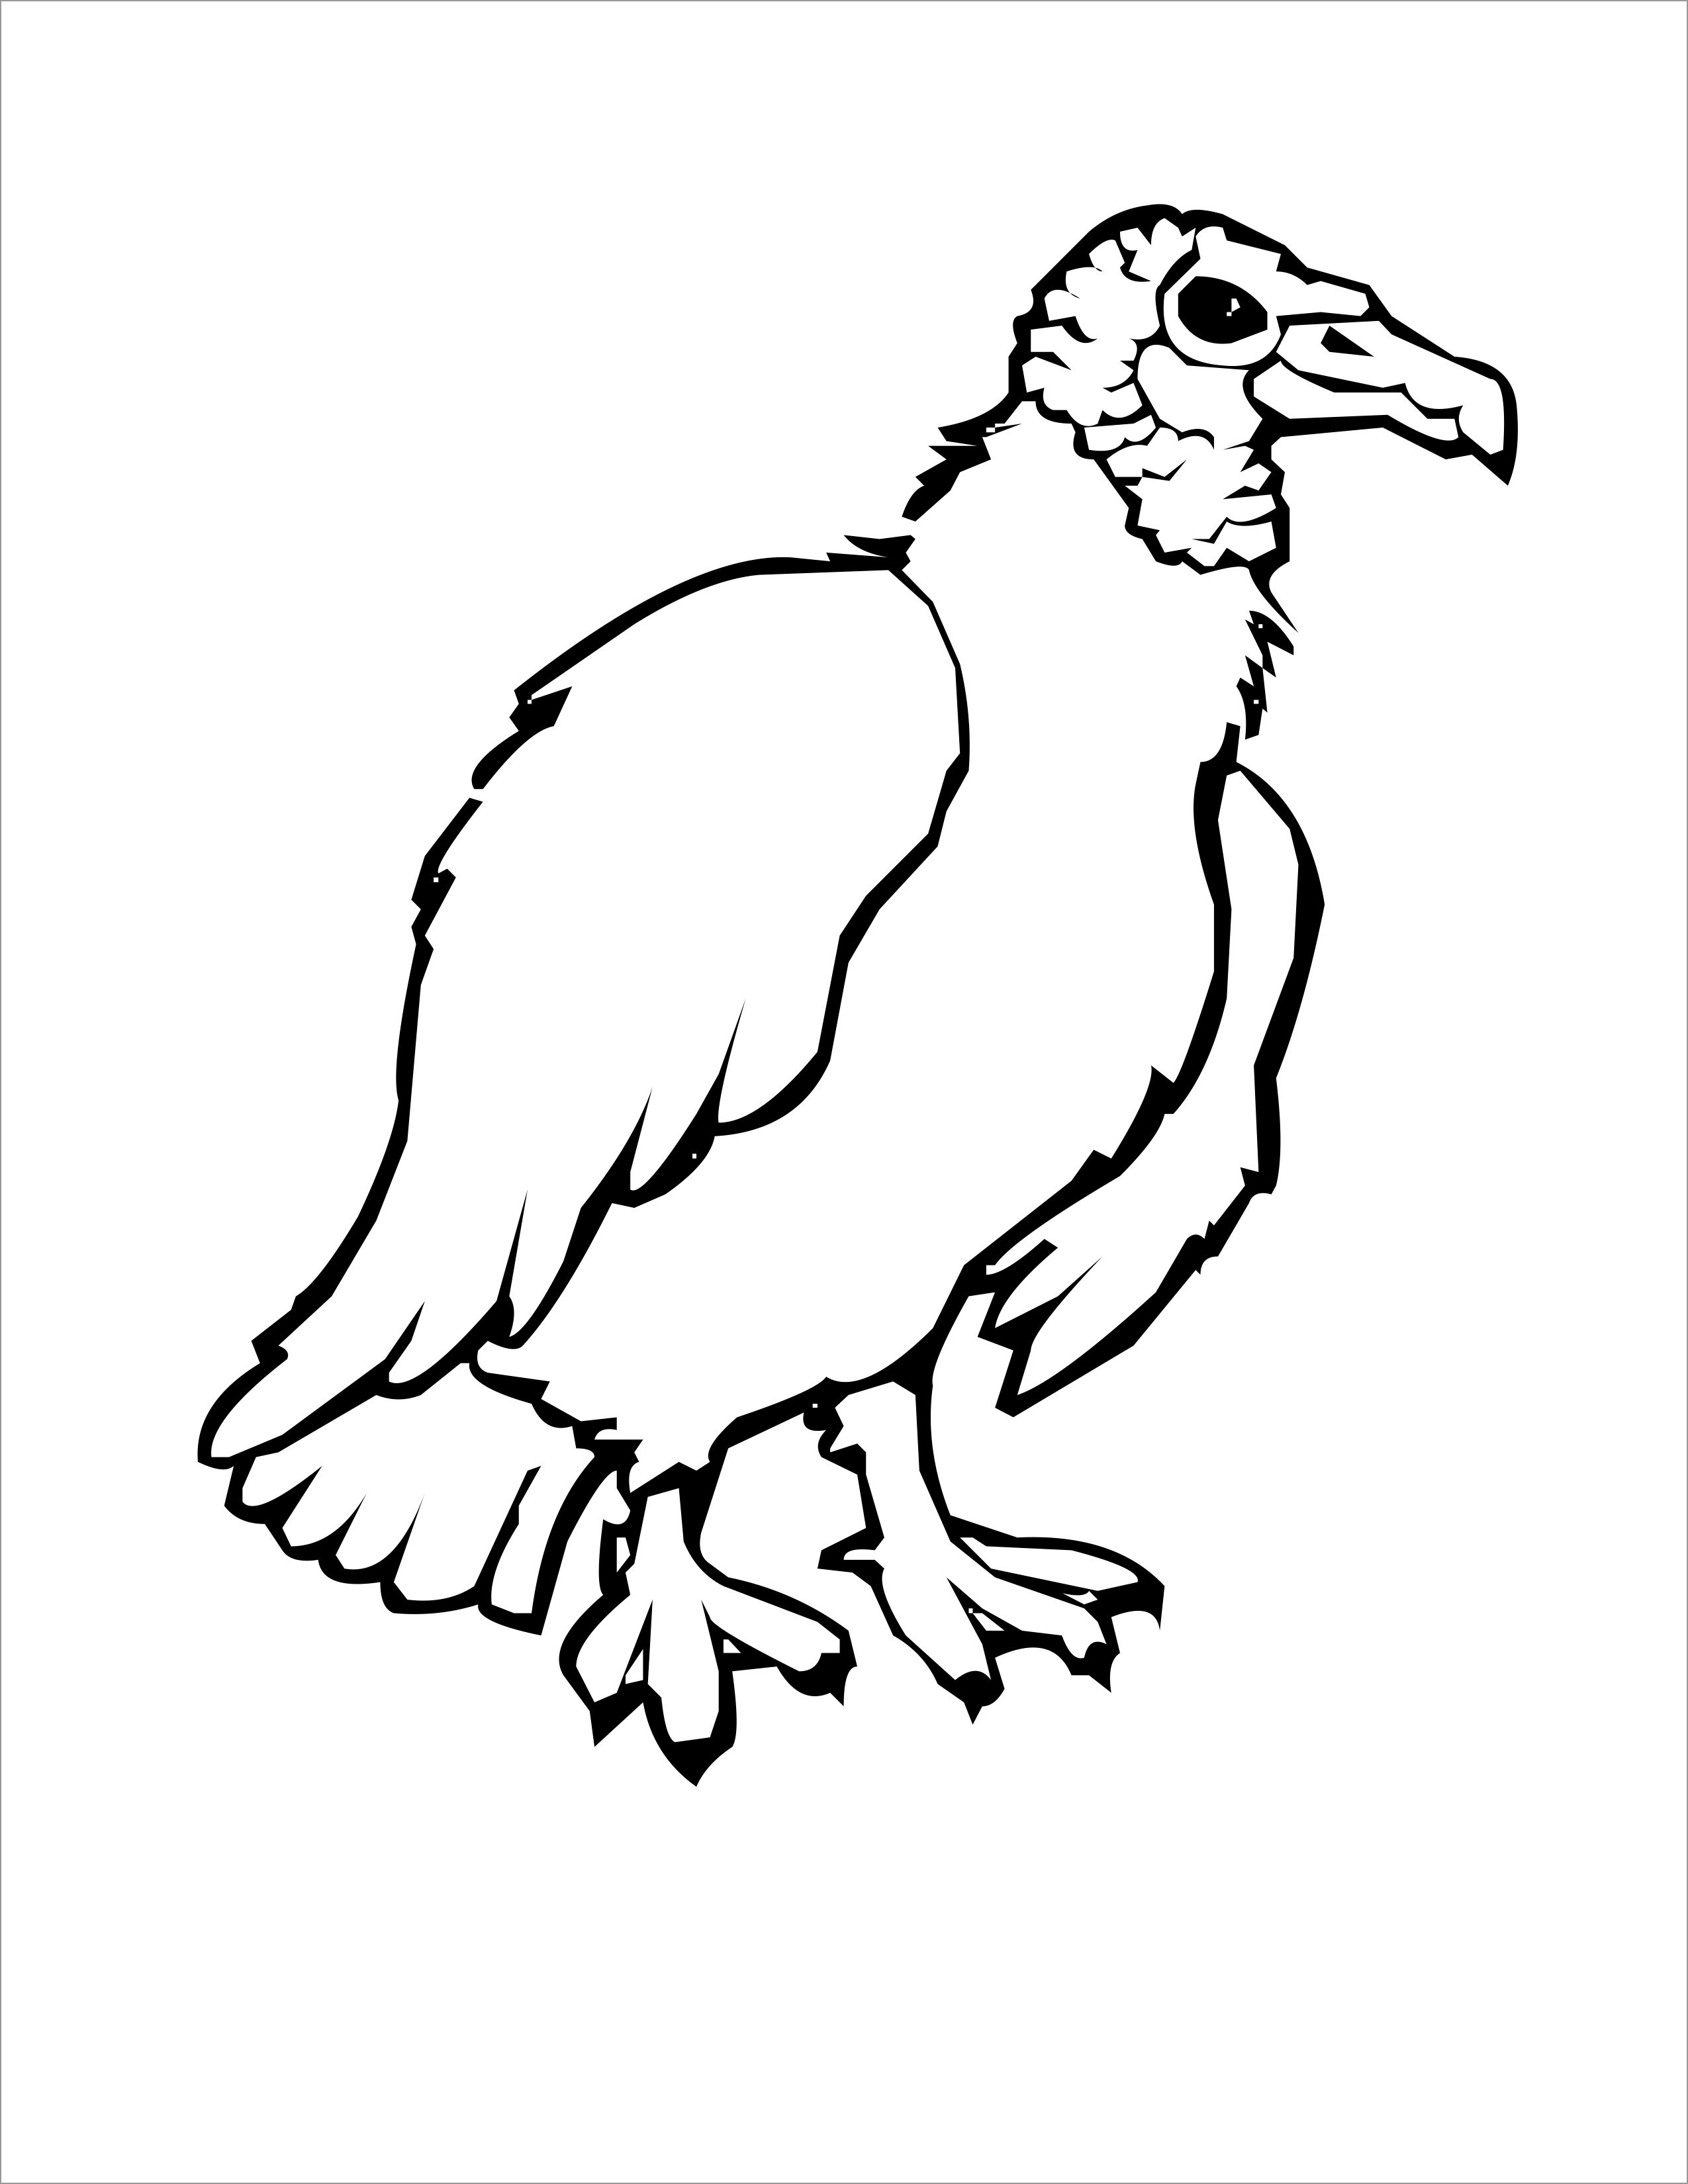 Vulture Coloring Page for Kids